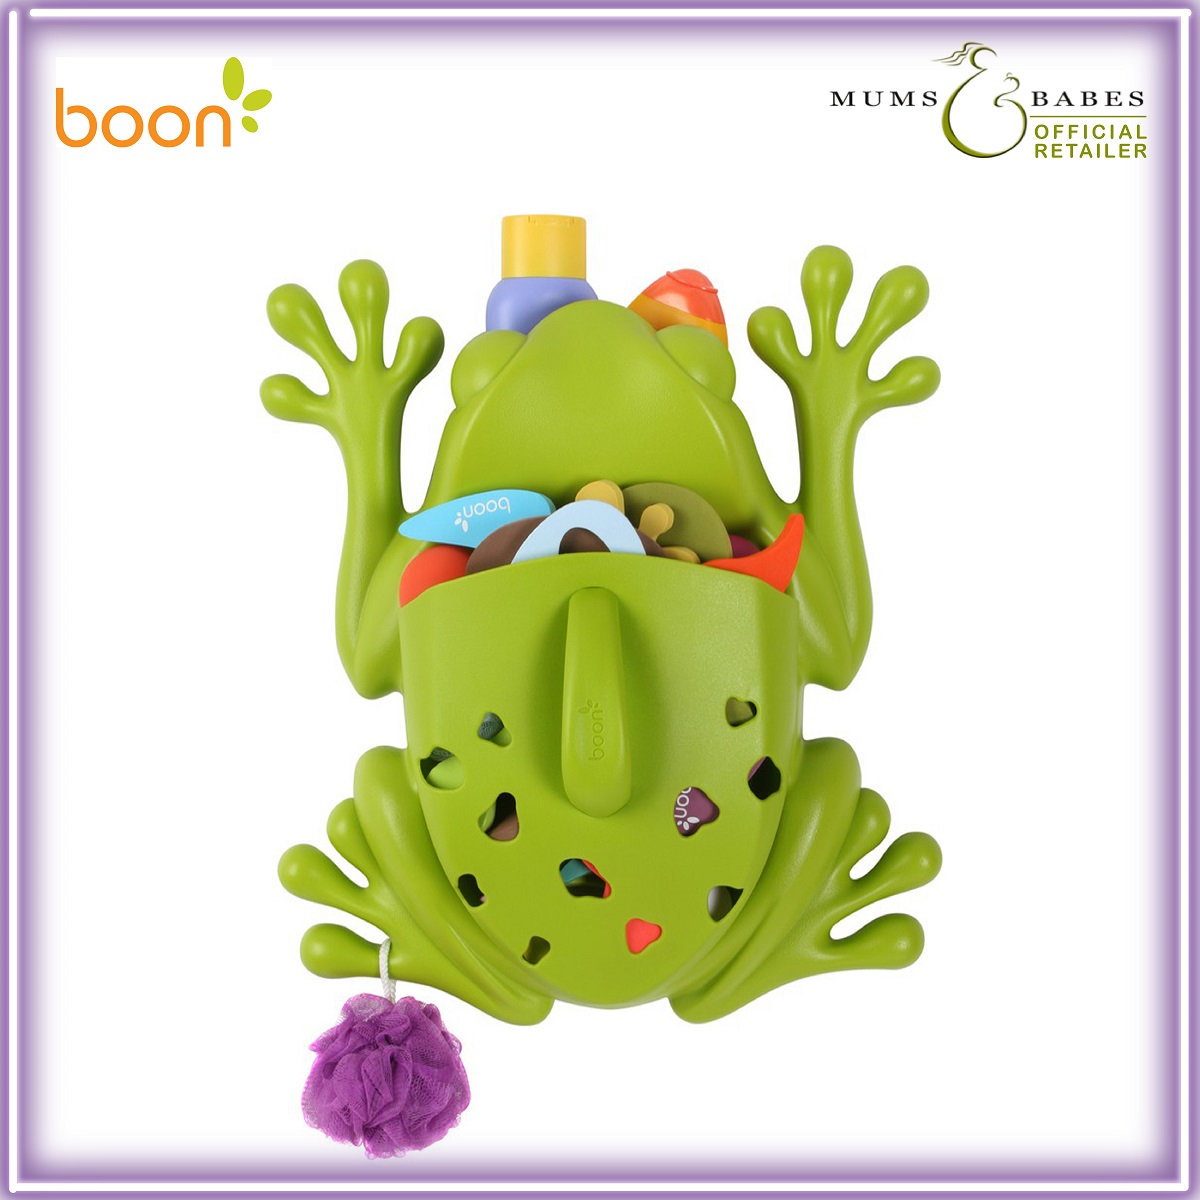 boon frog toy holder